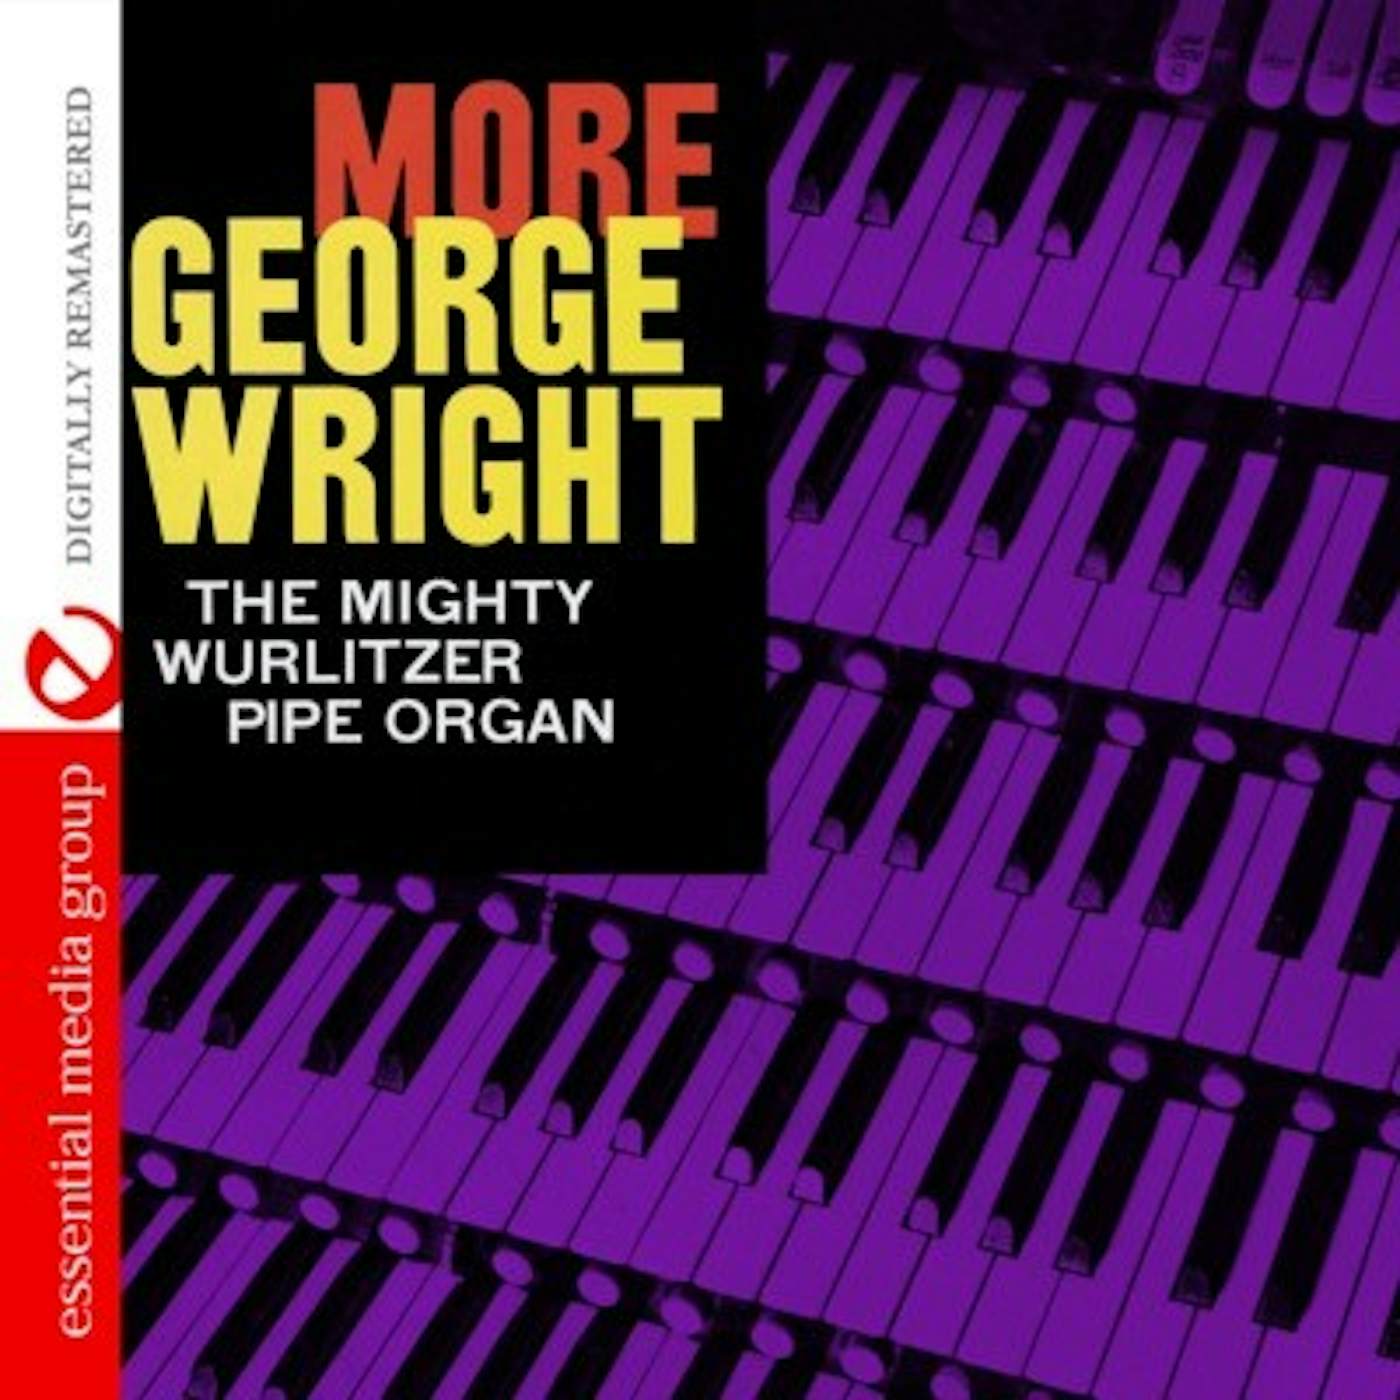 MORE GEORGE WRIGHT CD